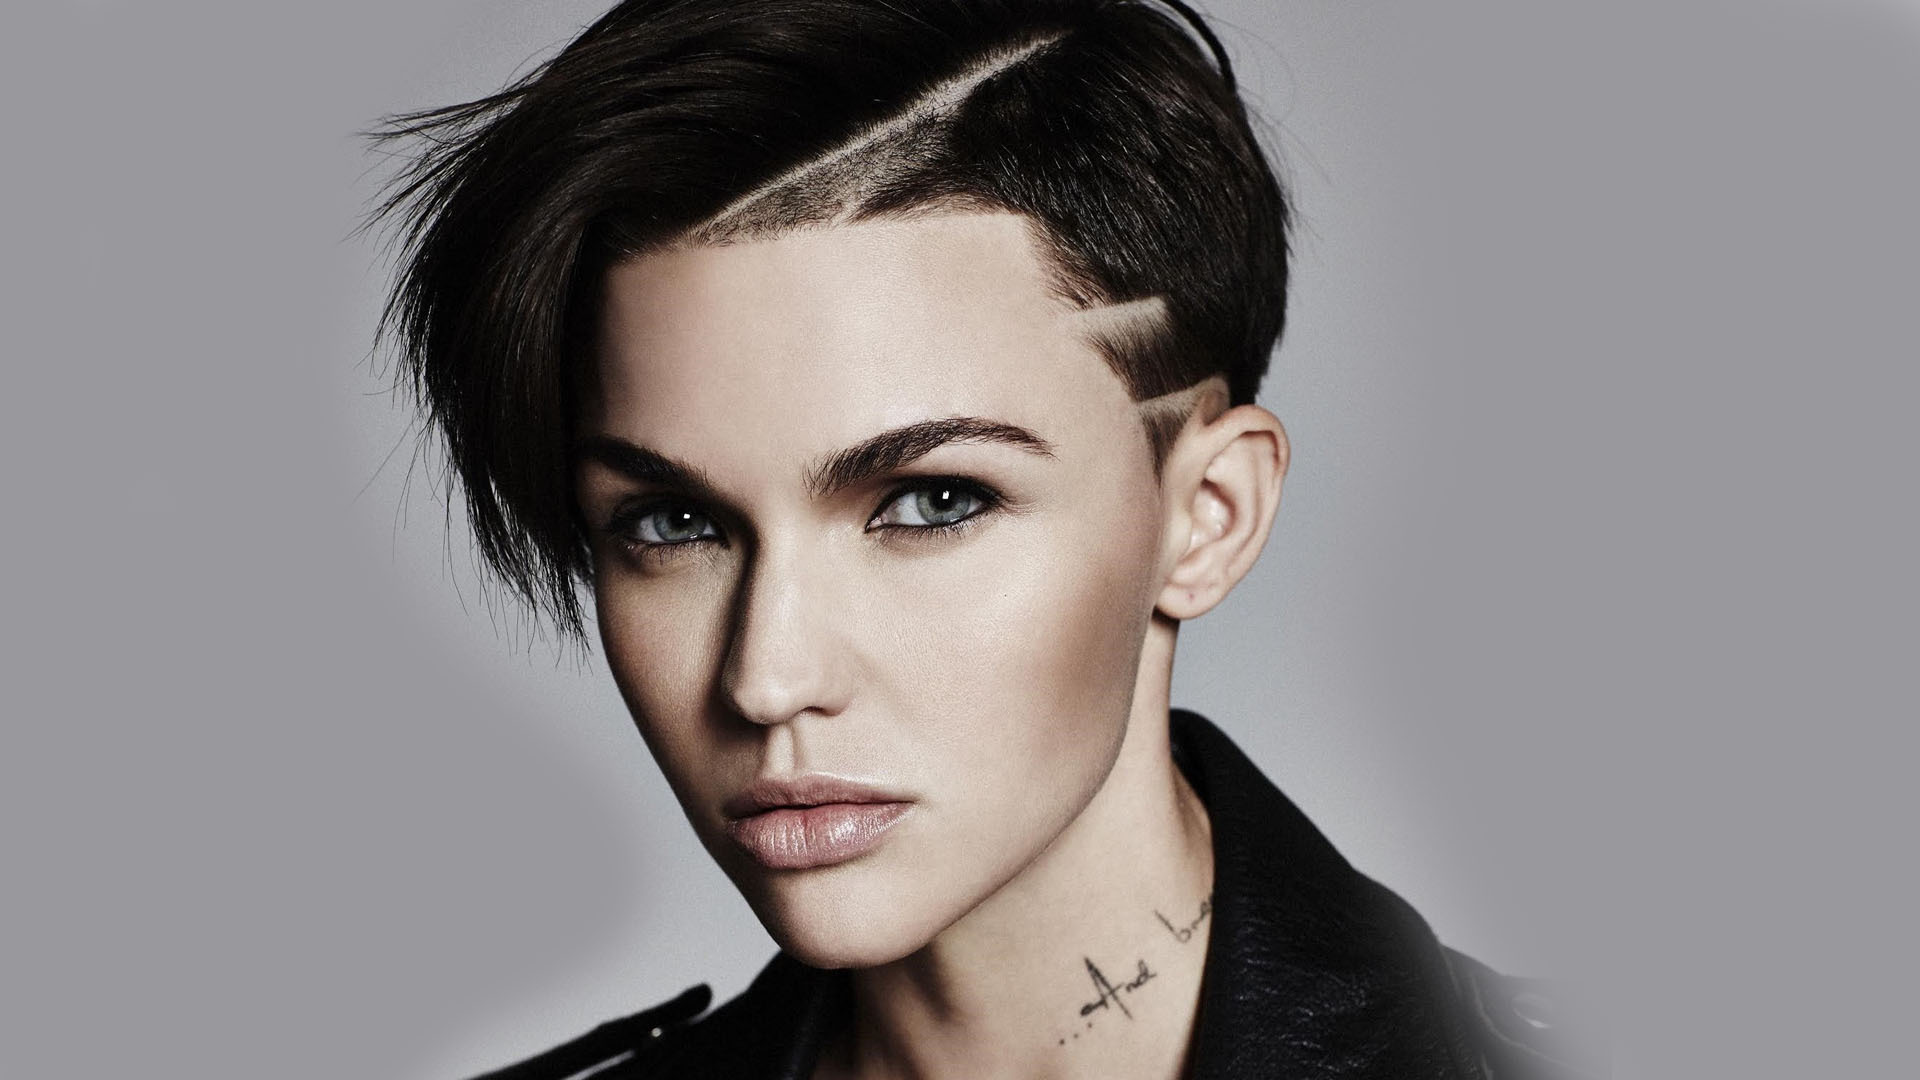 Ruby rose hottest pics